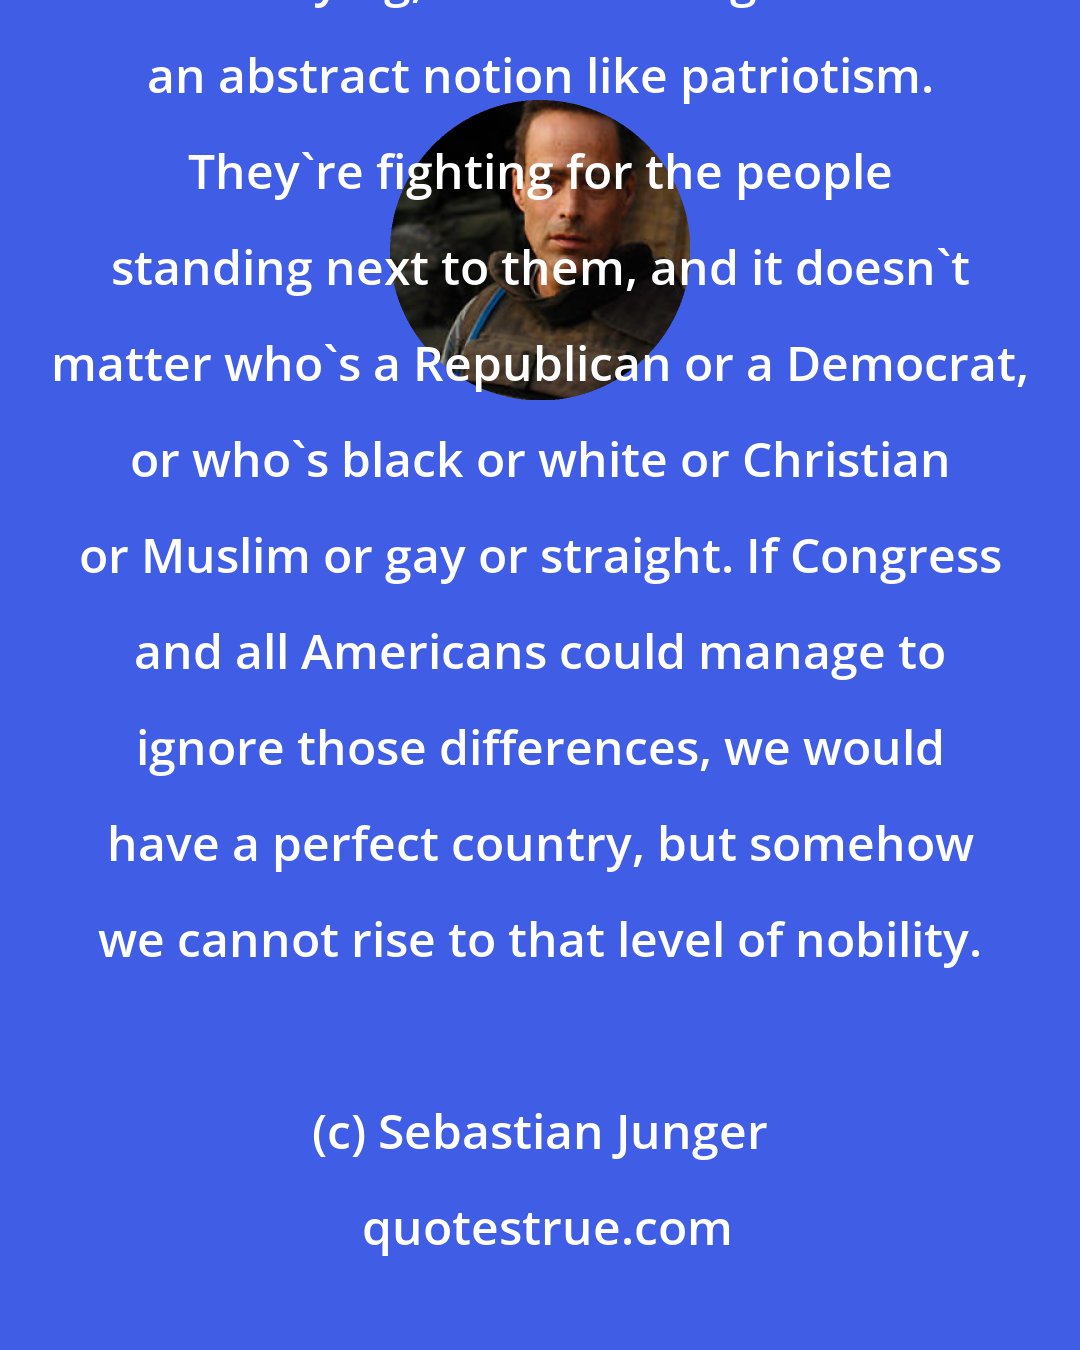 Sebastian Junger: Soldiers join the military to serve their country, but when bullets are flying, it's hard to fight for an abstract notion like patriotism. They're fighting for the people standing next to them, and it doesn't matter who's a Republican or a Democrat, or who's black or white or Christian or Muslim or gay or straight. If Congress and all Americans could manage to ignore those differences, we would have a perfect country, but somehow we cannot rise to that level of nobility.